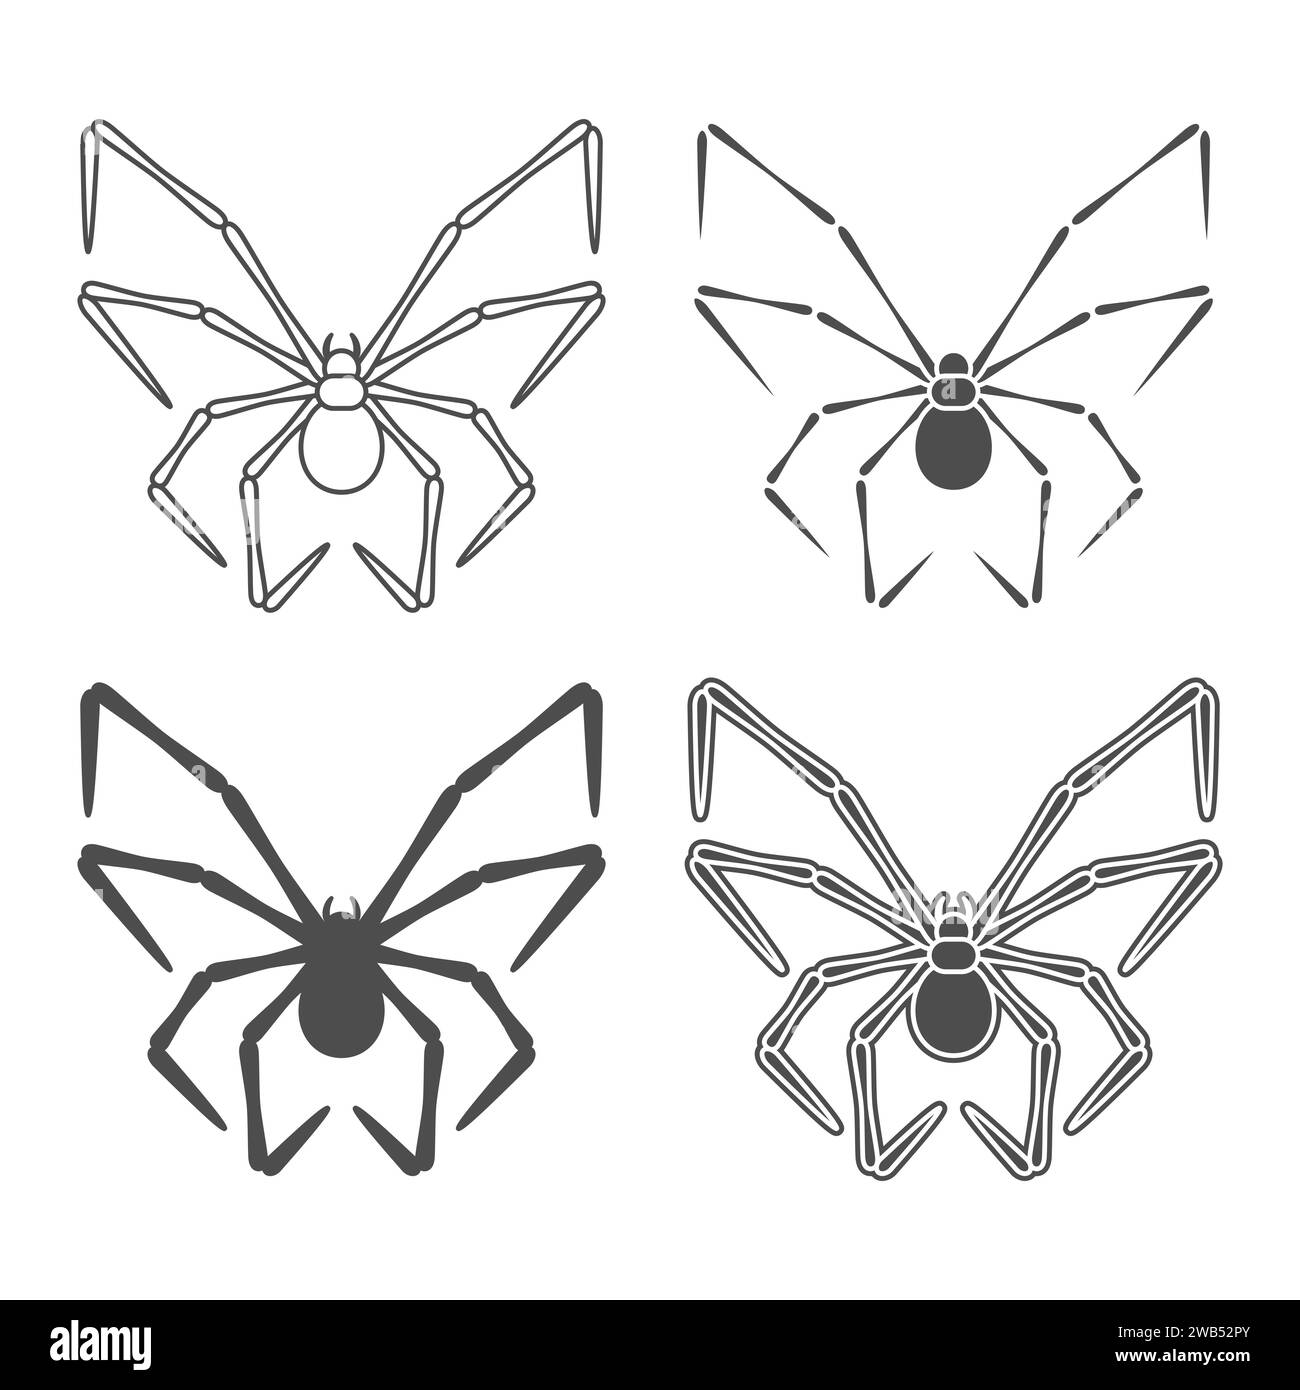 Set of black and white illustrations with butterfly shaped spider. Isolated vector objects on white background. Stock Vector